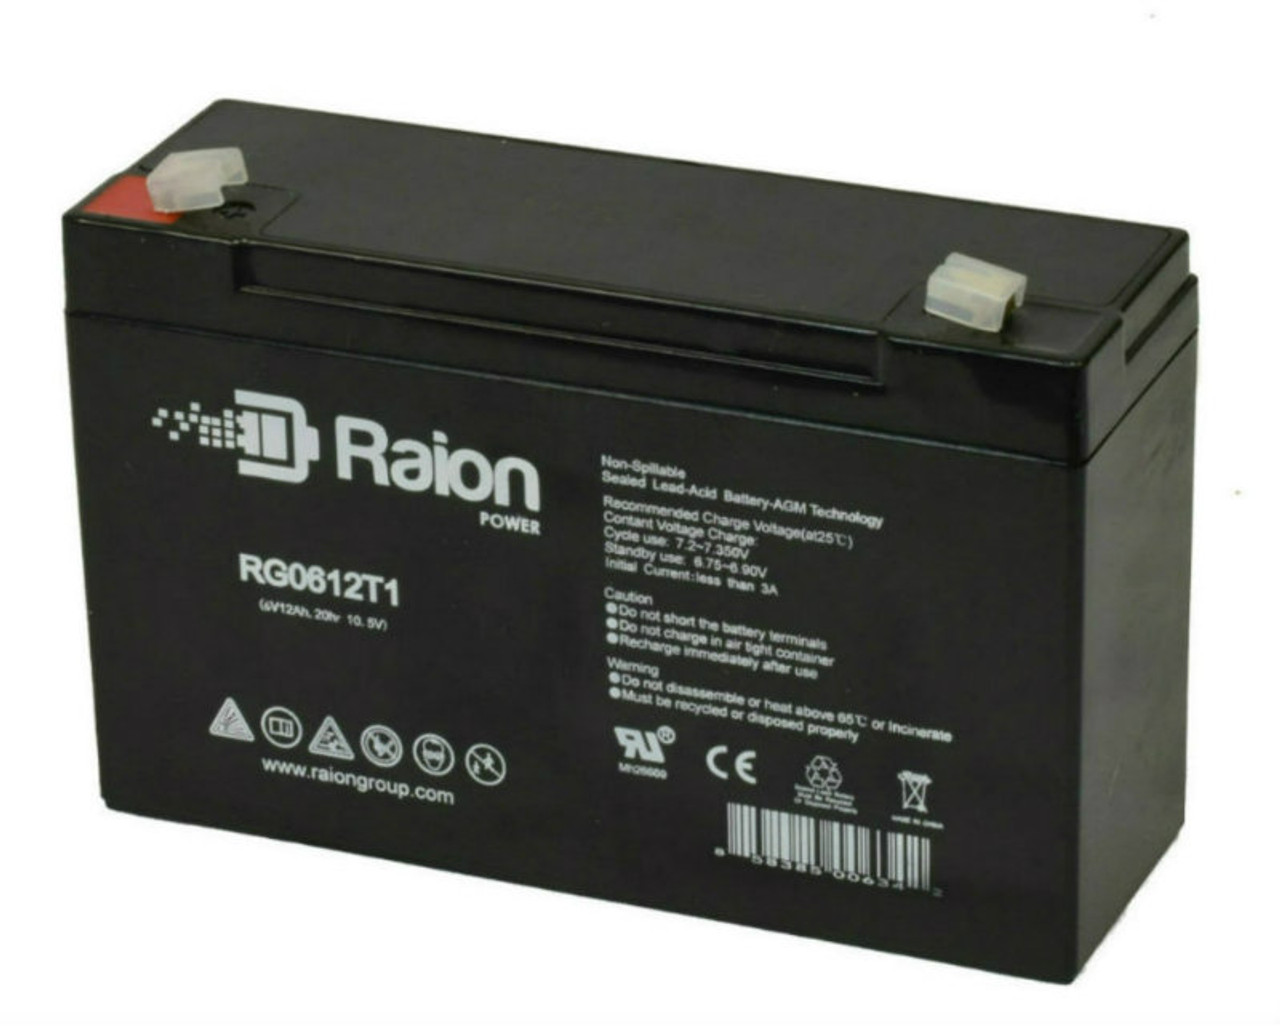 Raion Power RG06120T1 6V 12Ah Replacement UPS Battery Cartridge for ONEAC ONe200D (Double Battery Model)